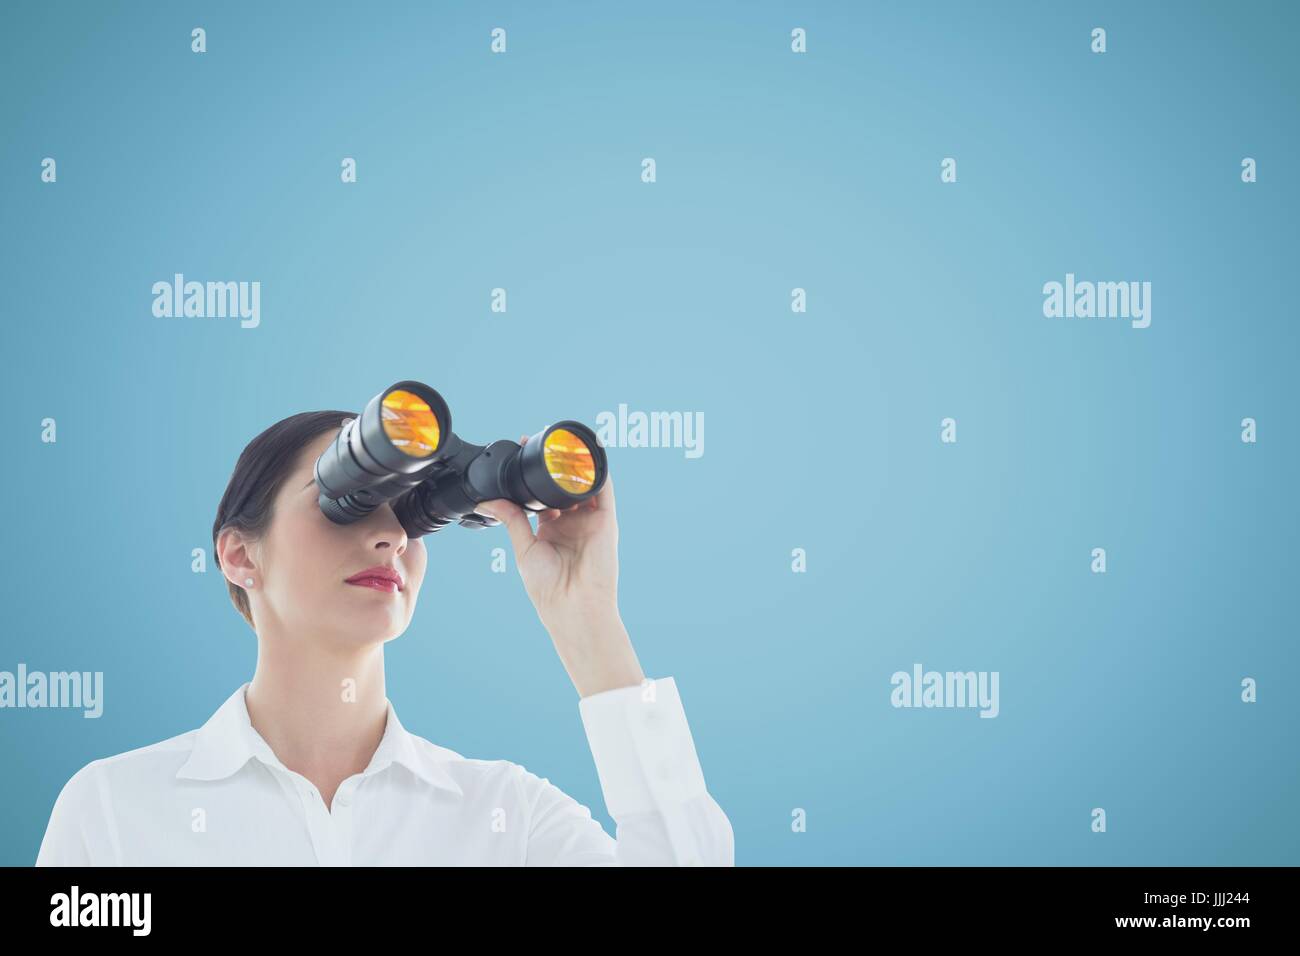 Woman looking through binoculars against blue background and copy space Stock Photo